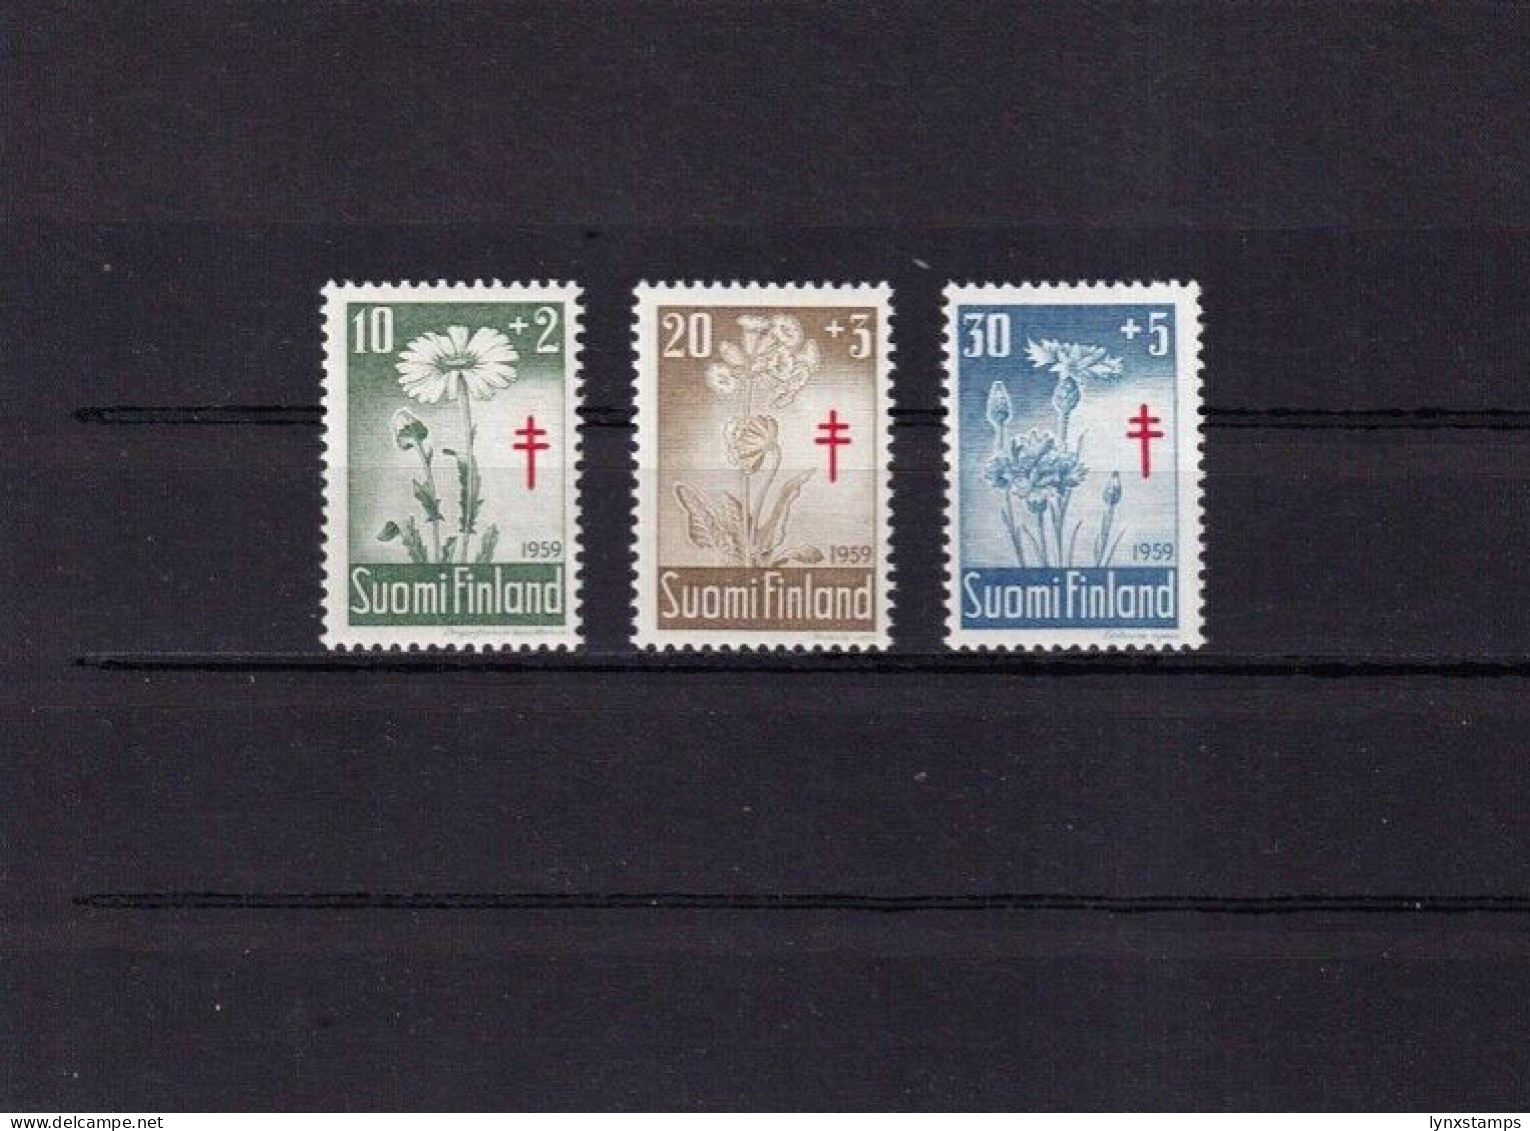 G022 Finland 1959 The Prevention Of Tuberculosis - Flowers CV$10 - Ungebraucht